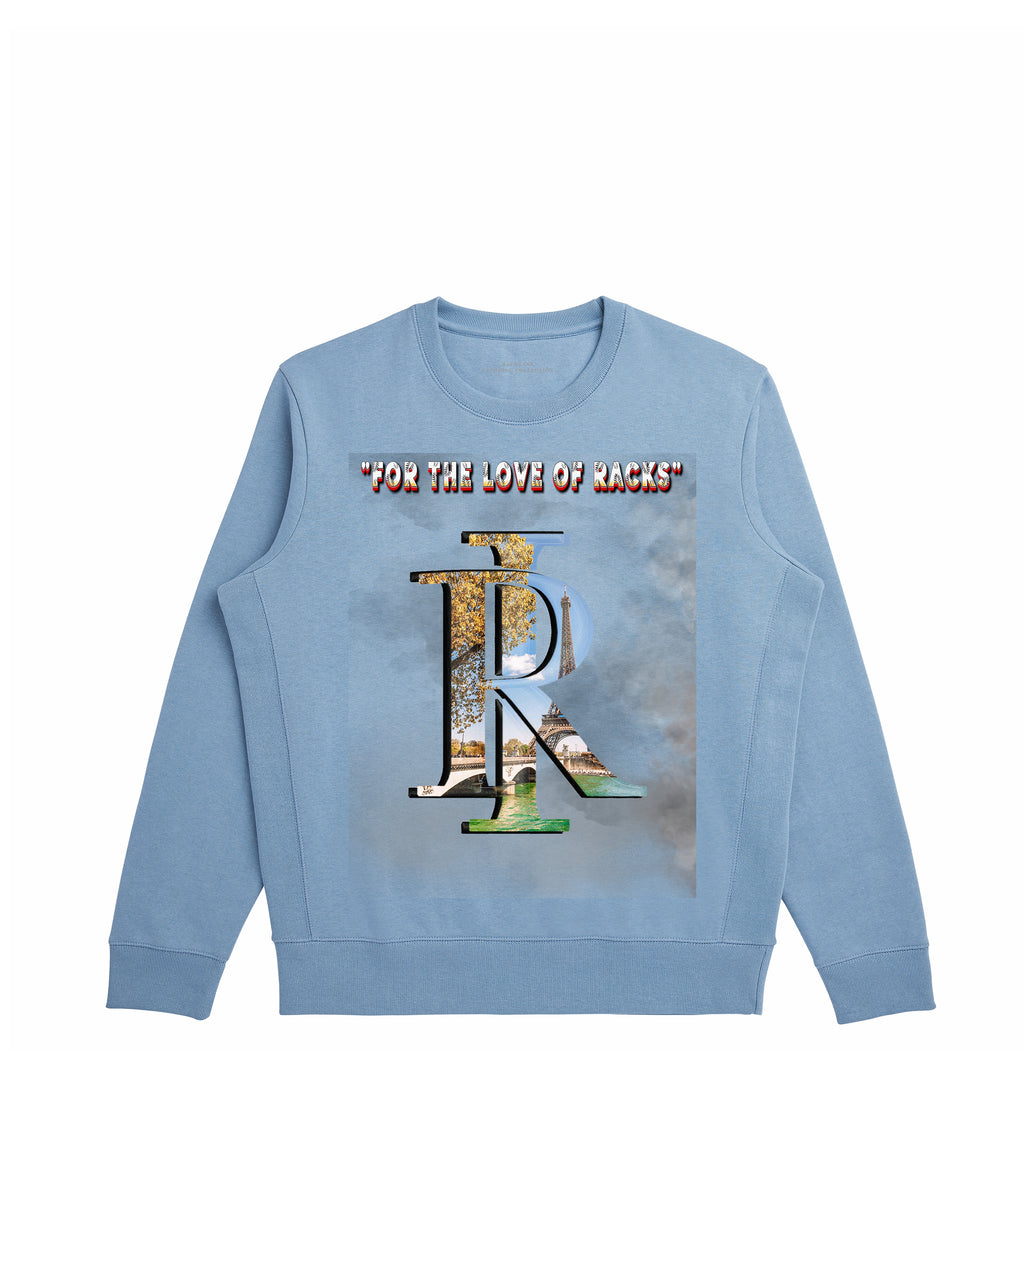 For The Love Crewneck - Cloudy Blue